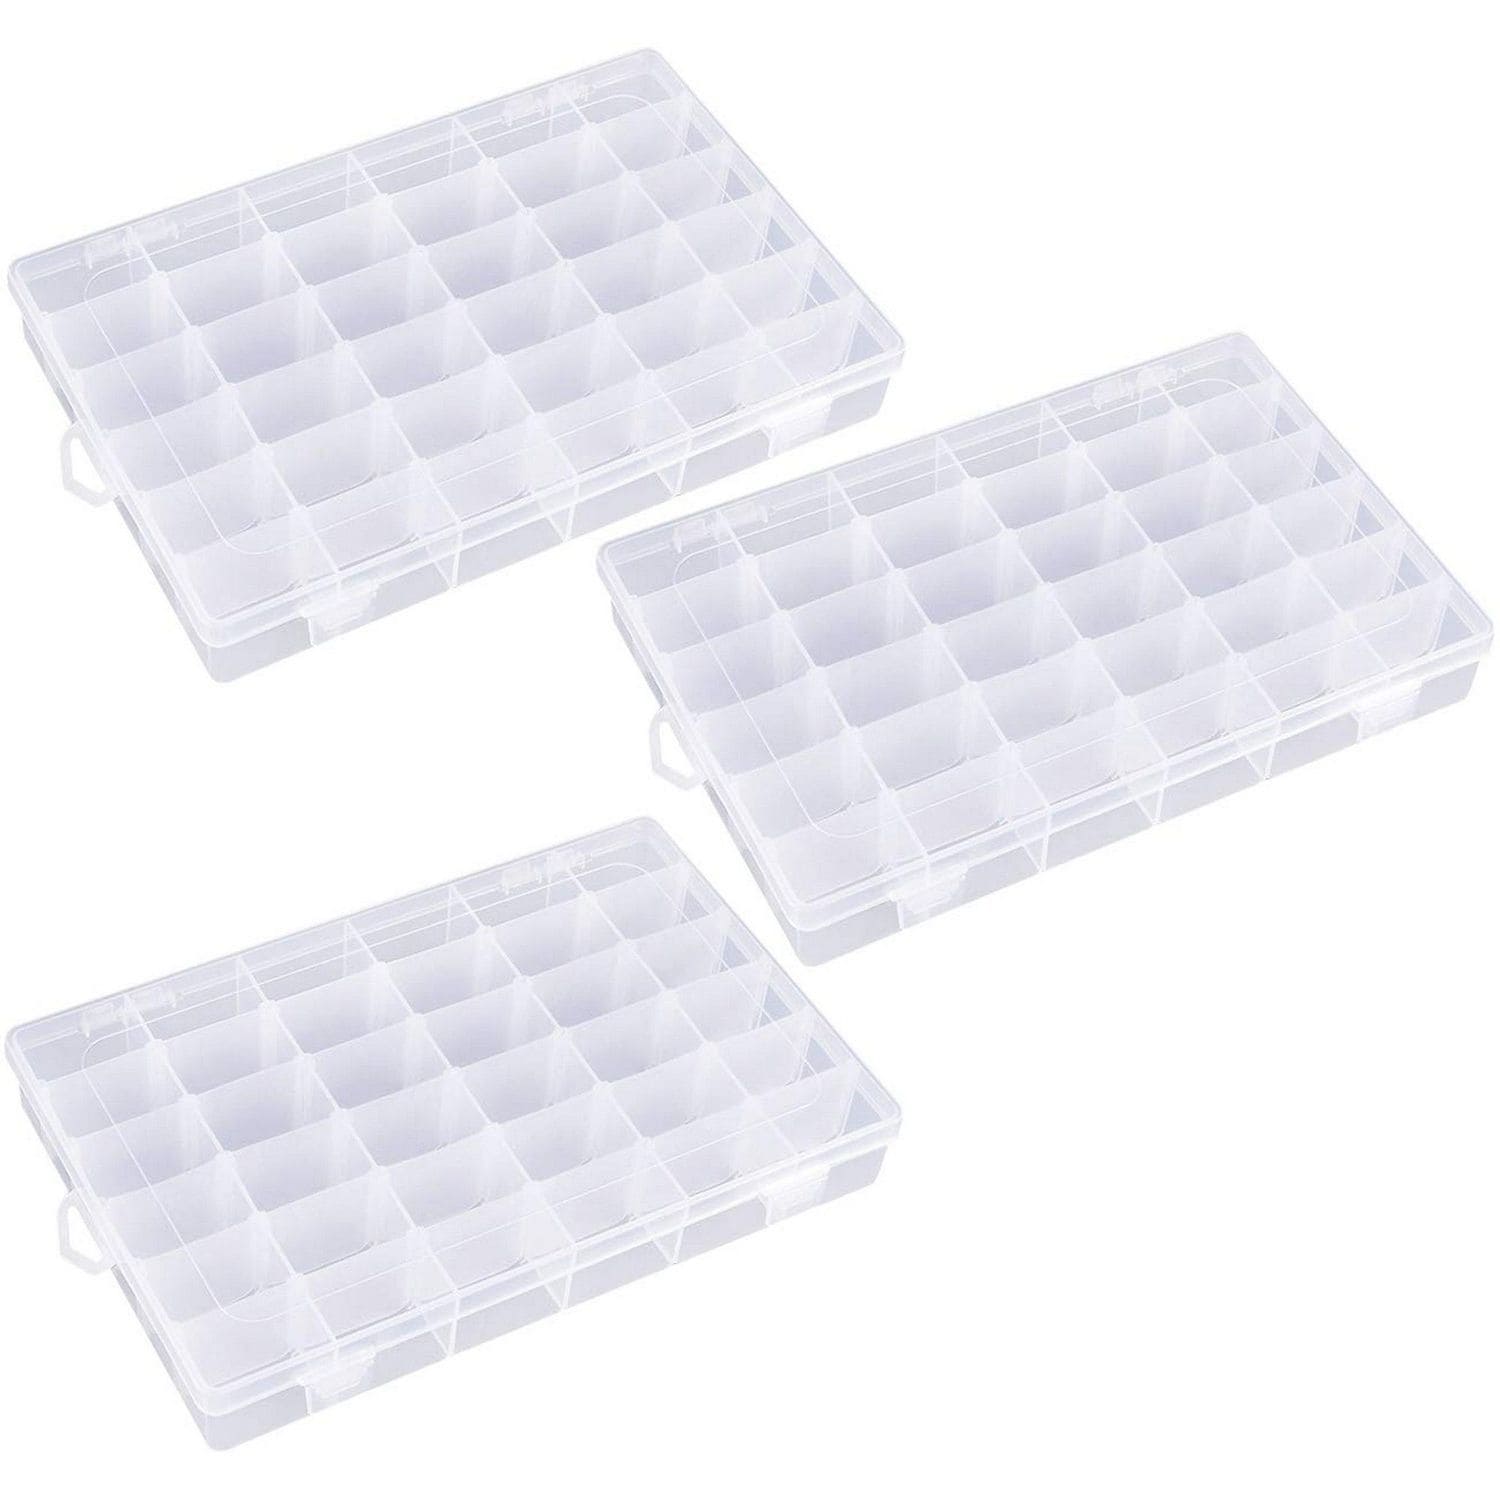 Everything Mary Plastic Bead Storage Case with 24 Jars, Clear, (Single)